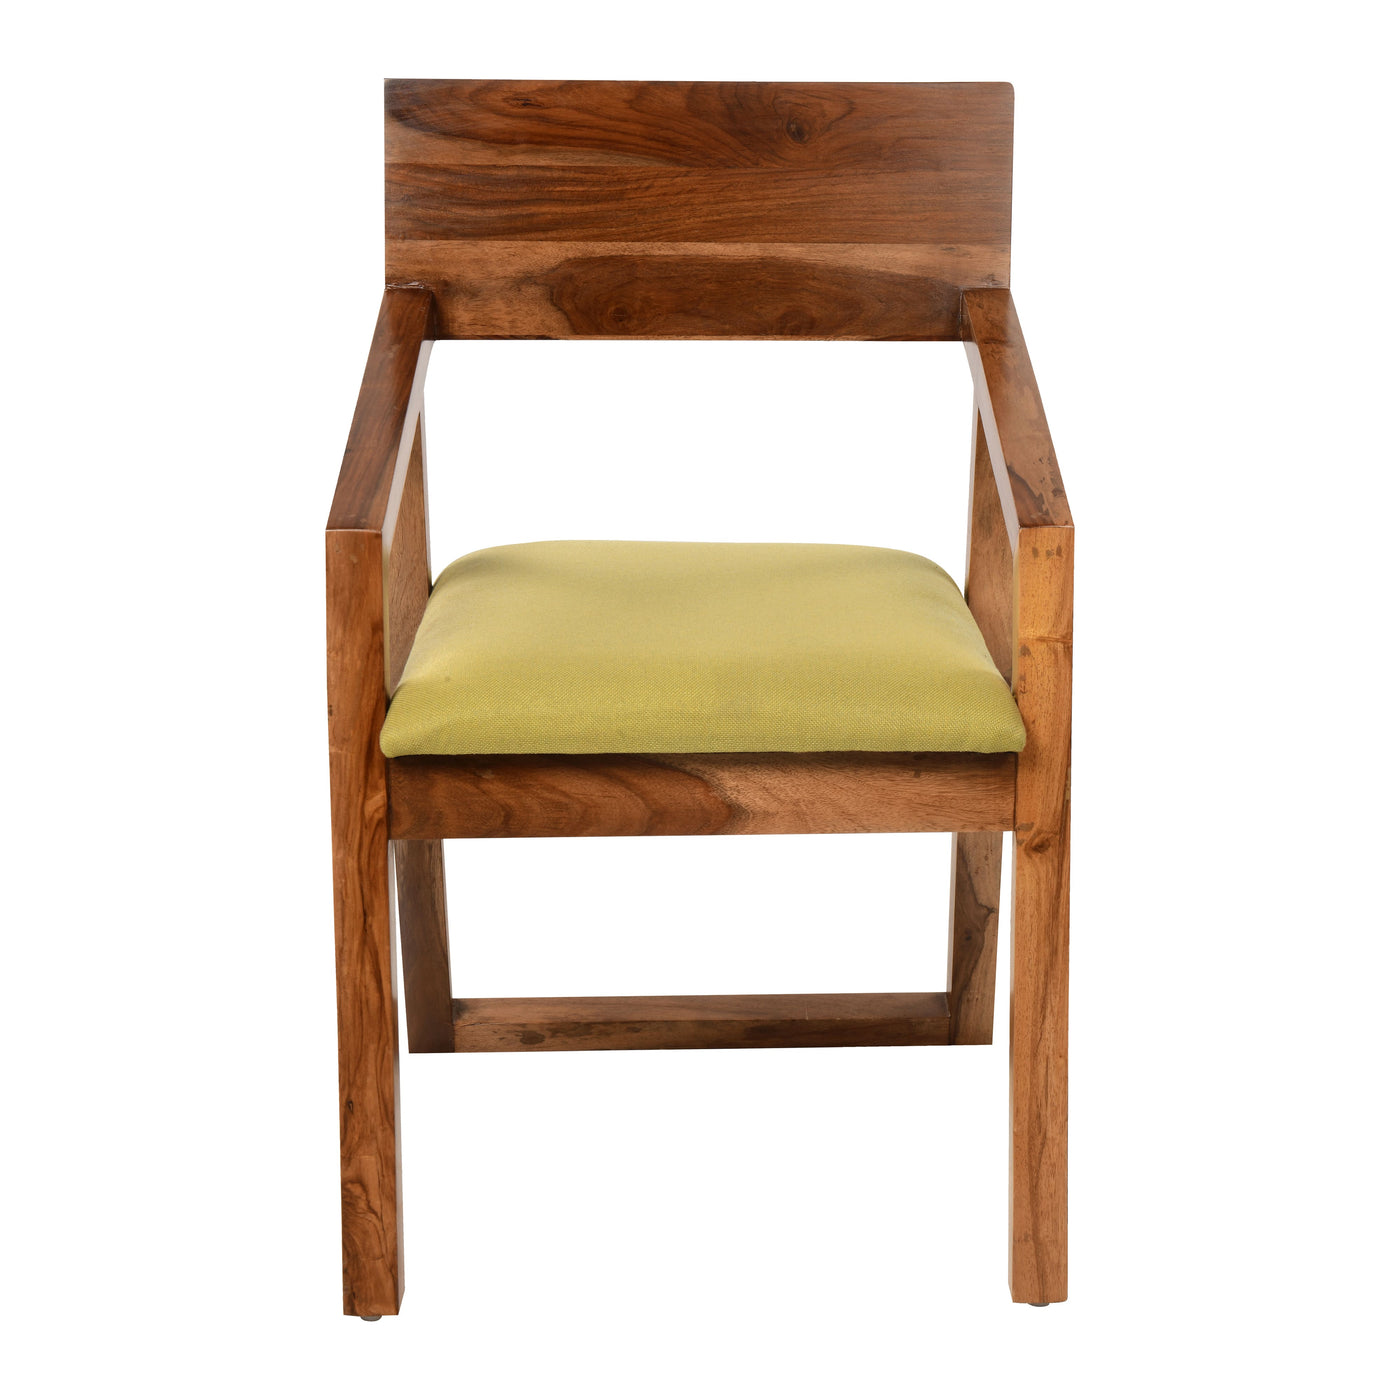 Astral Wooden Chair